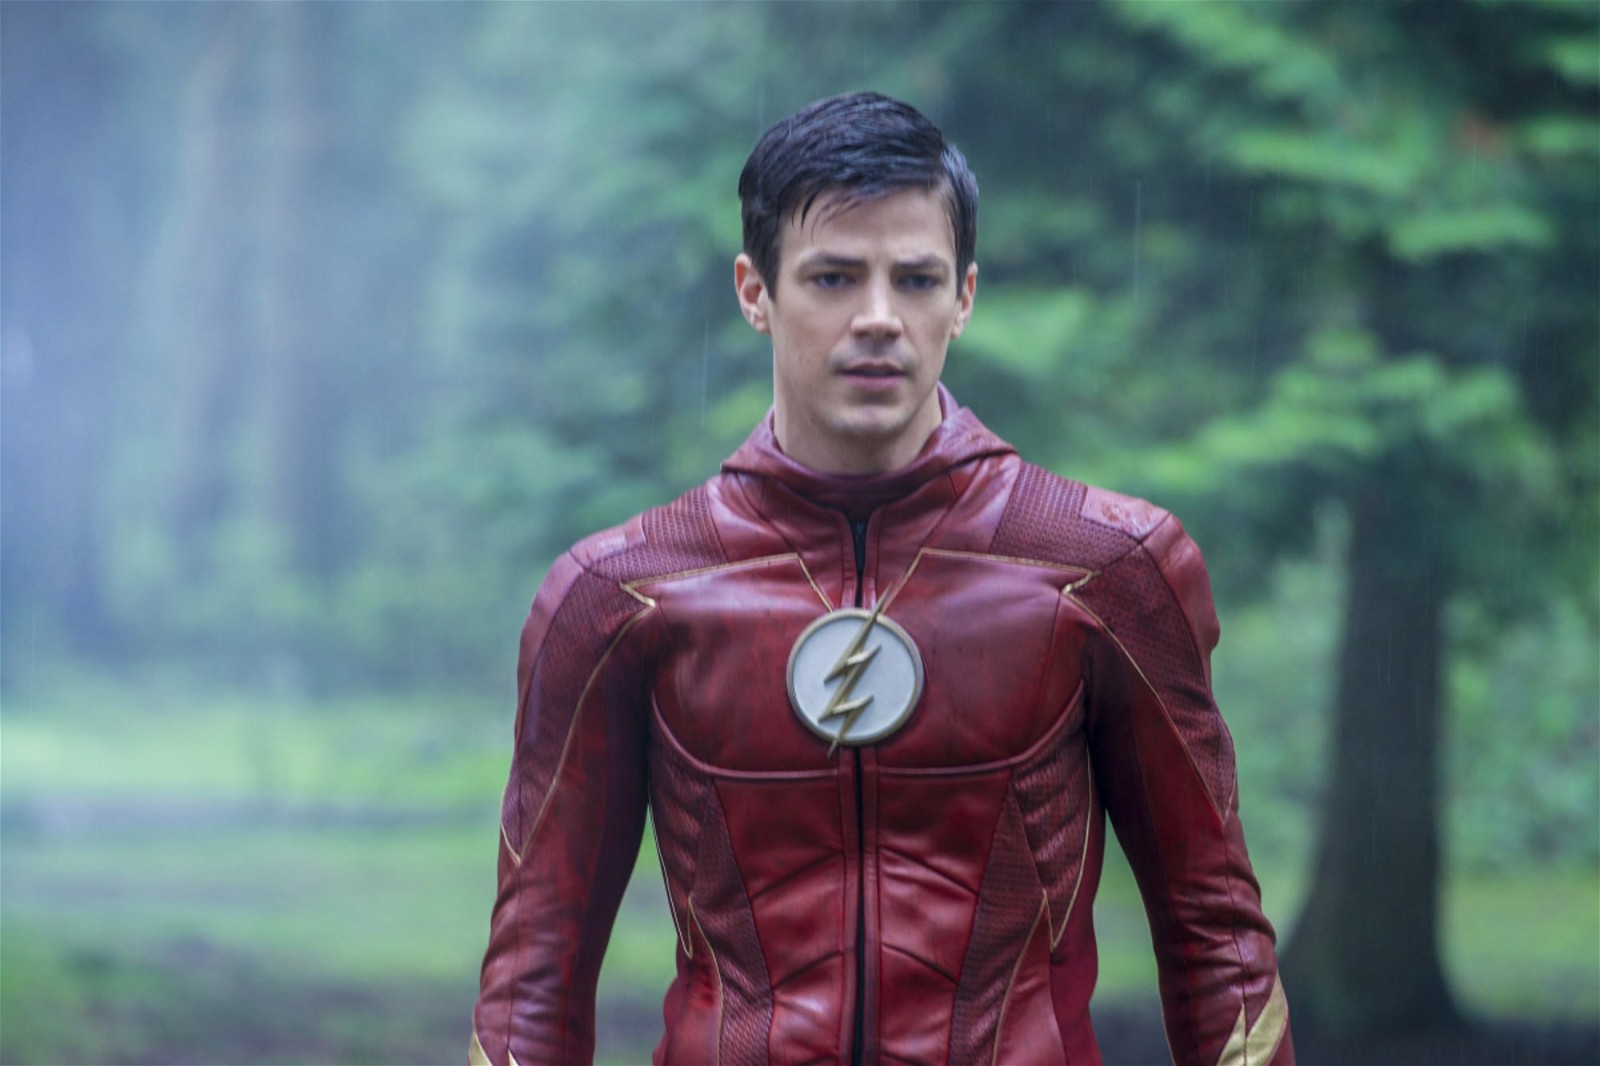 The Flash from the CW series